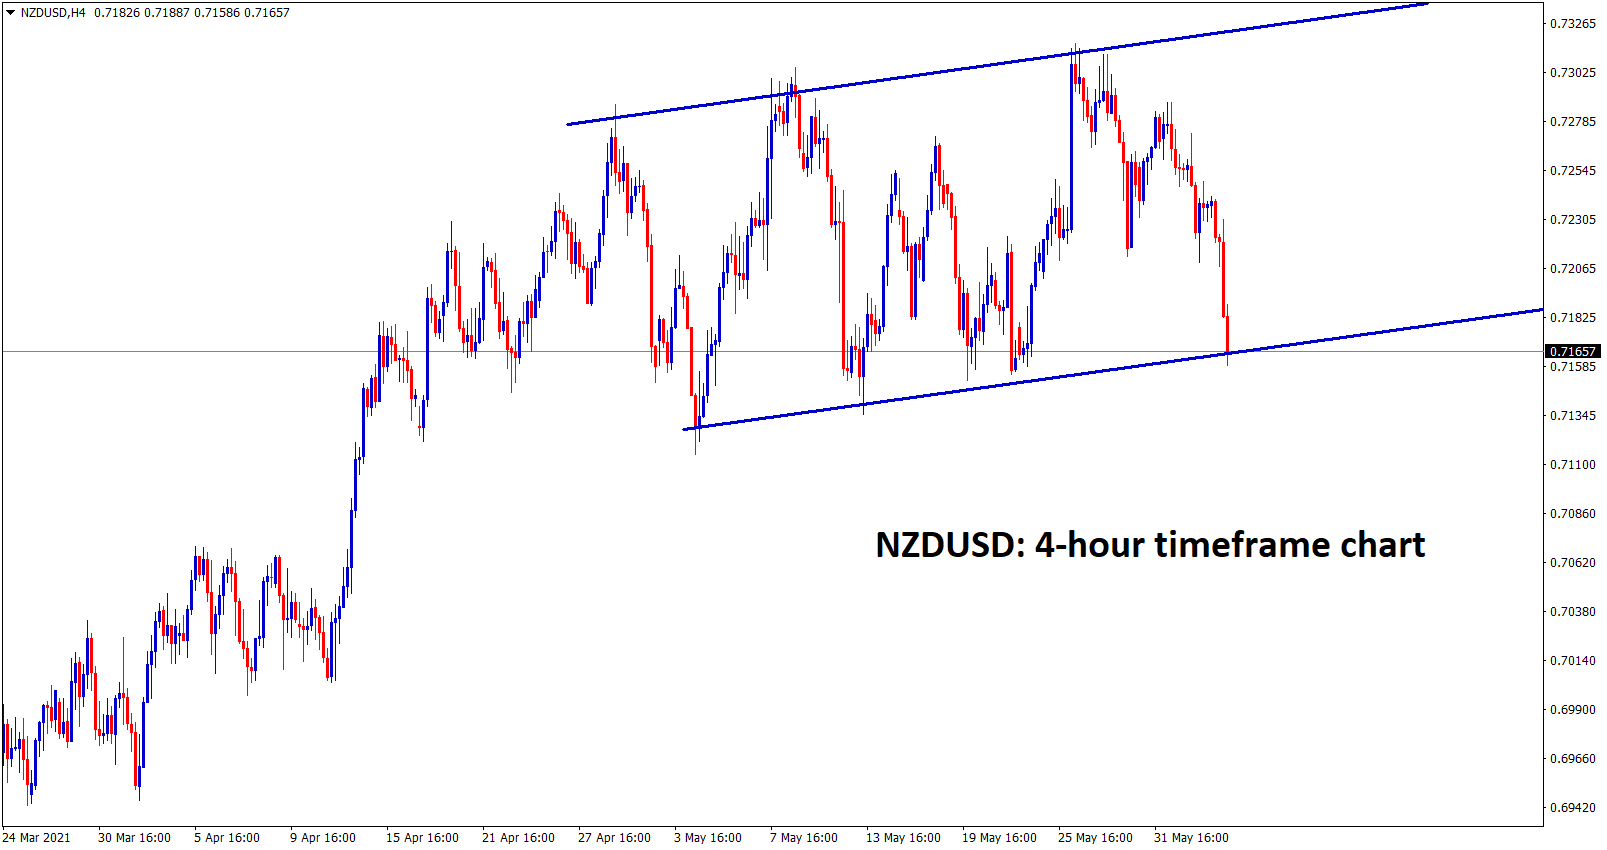 NZDUSD at the support zone wait for breakout or reversal